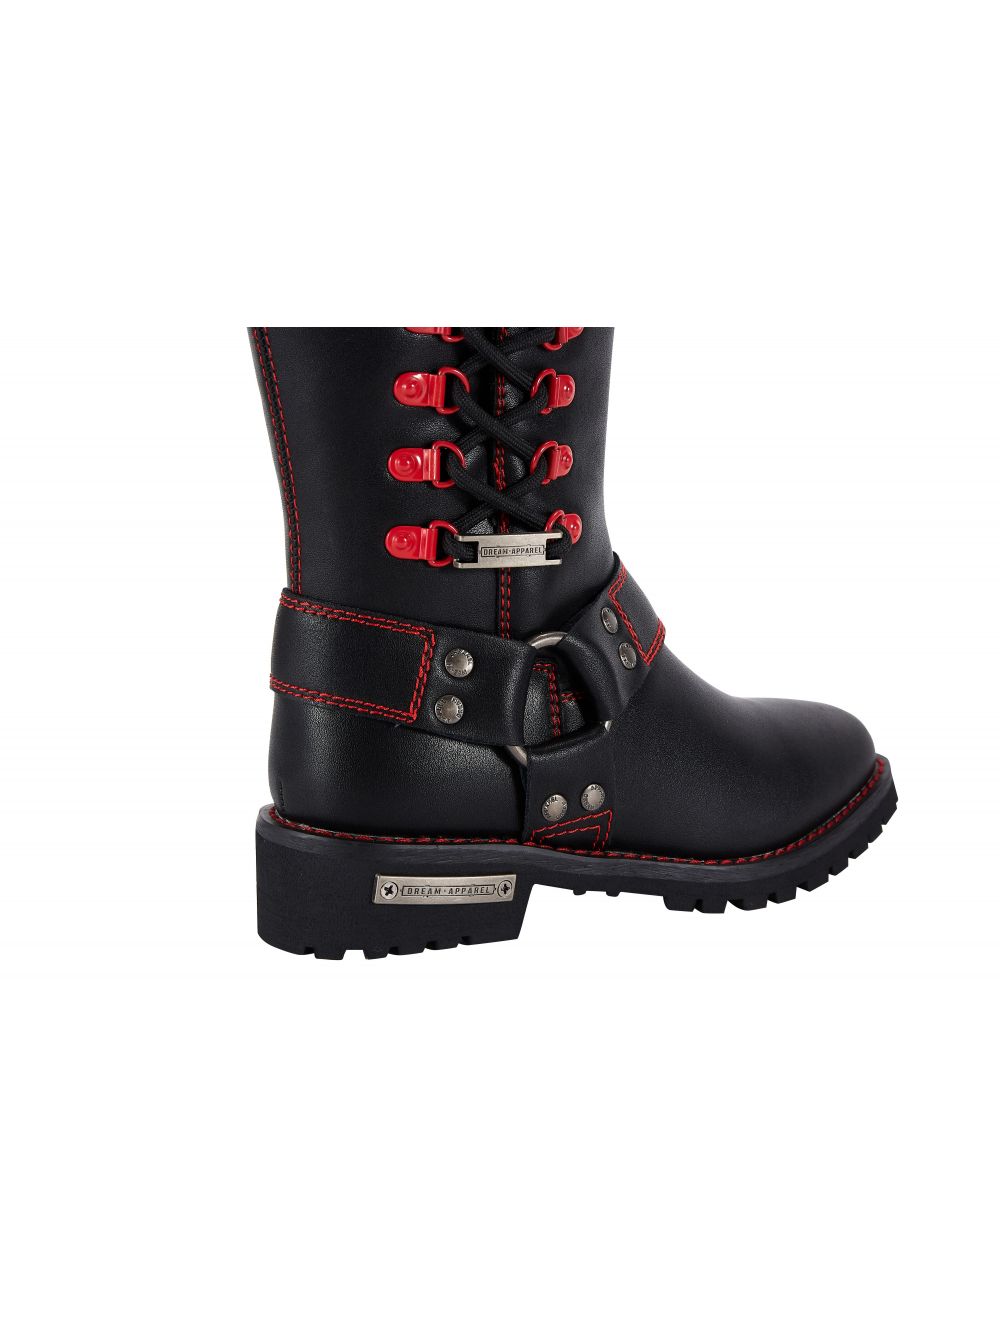 Women's Boots with Red Stitching & Laces